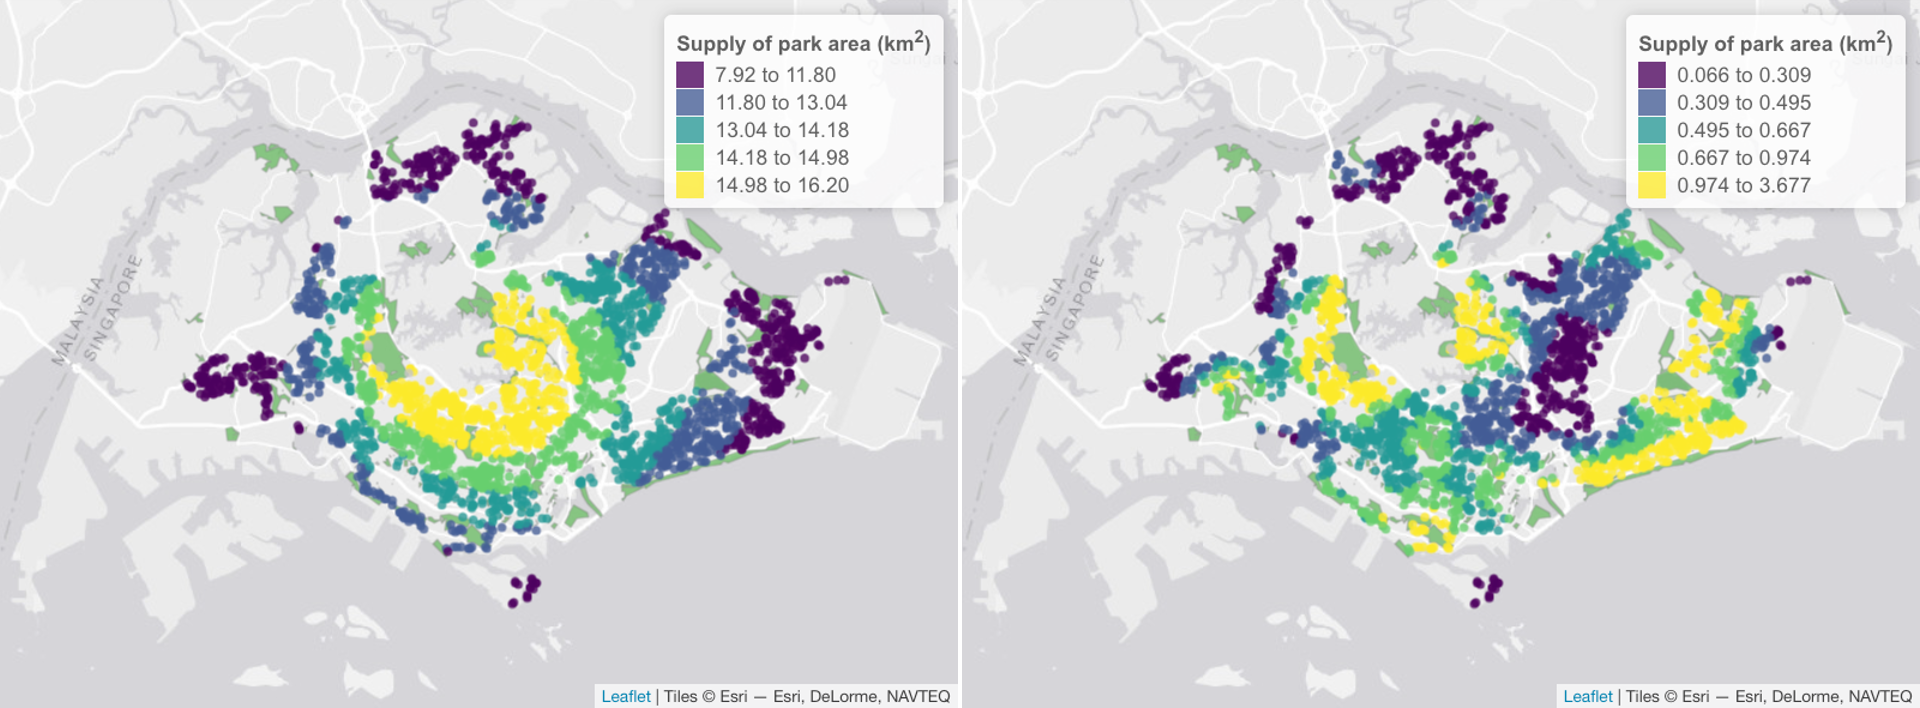 Screenshot: Examples showing the supply of OSM park area to residential buildings in Singapore for the year 2020 when the value of Coefficient c is 0.1 (left panel) and 1 (right panel). Each building is denoted as a pount (a random subset is shown). The color palette for the buildings (points) is binned according to quantile values.